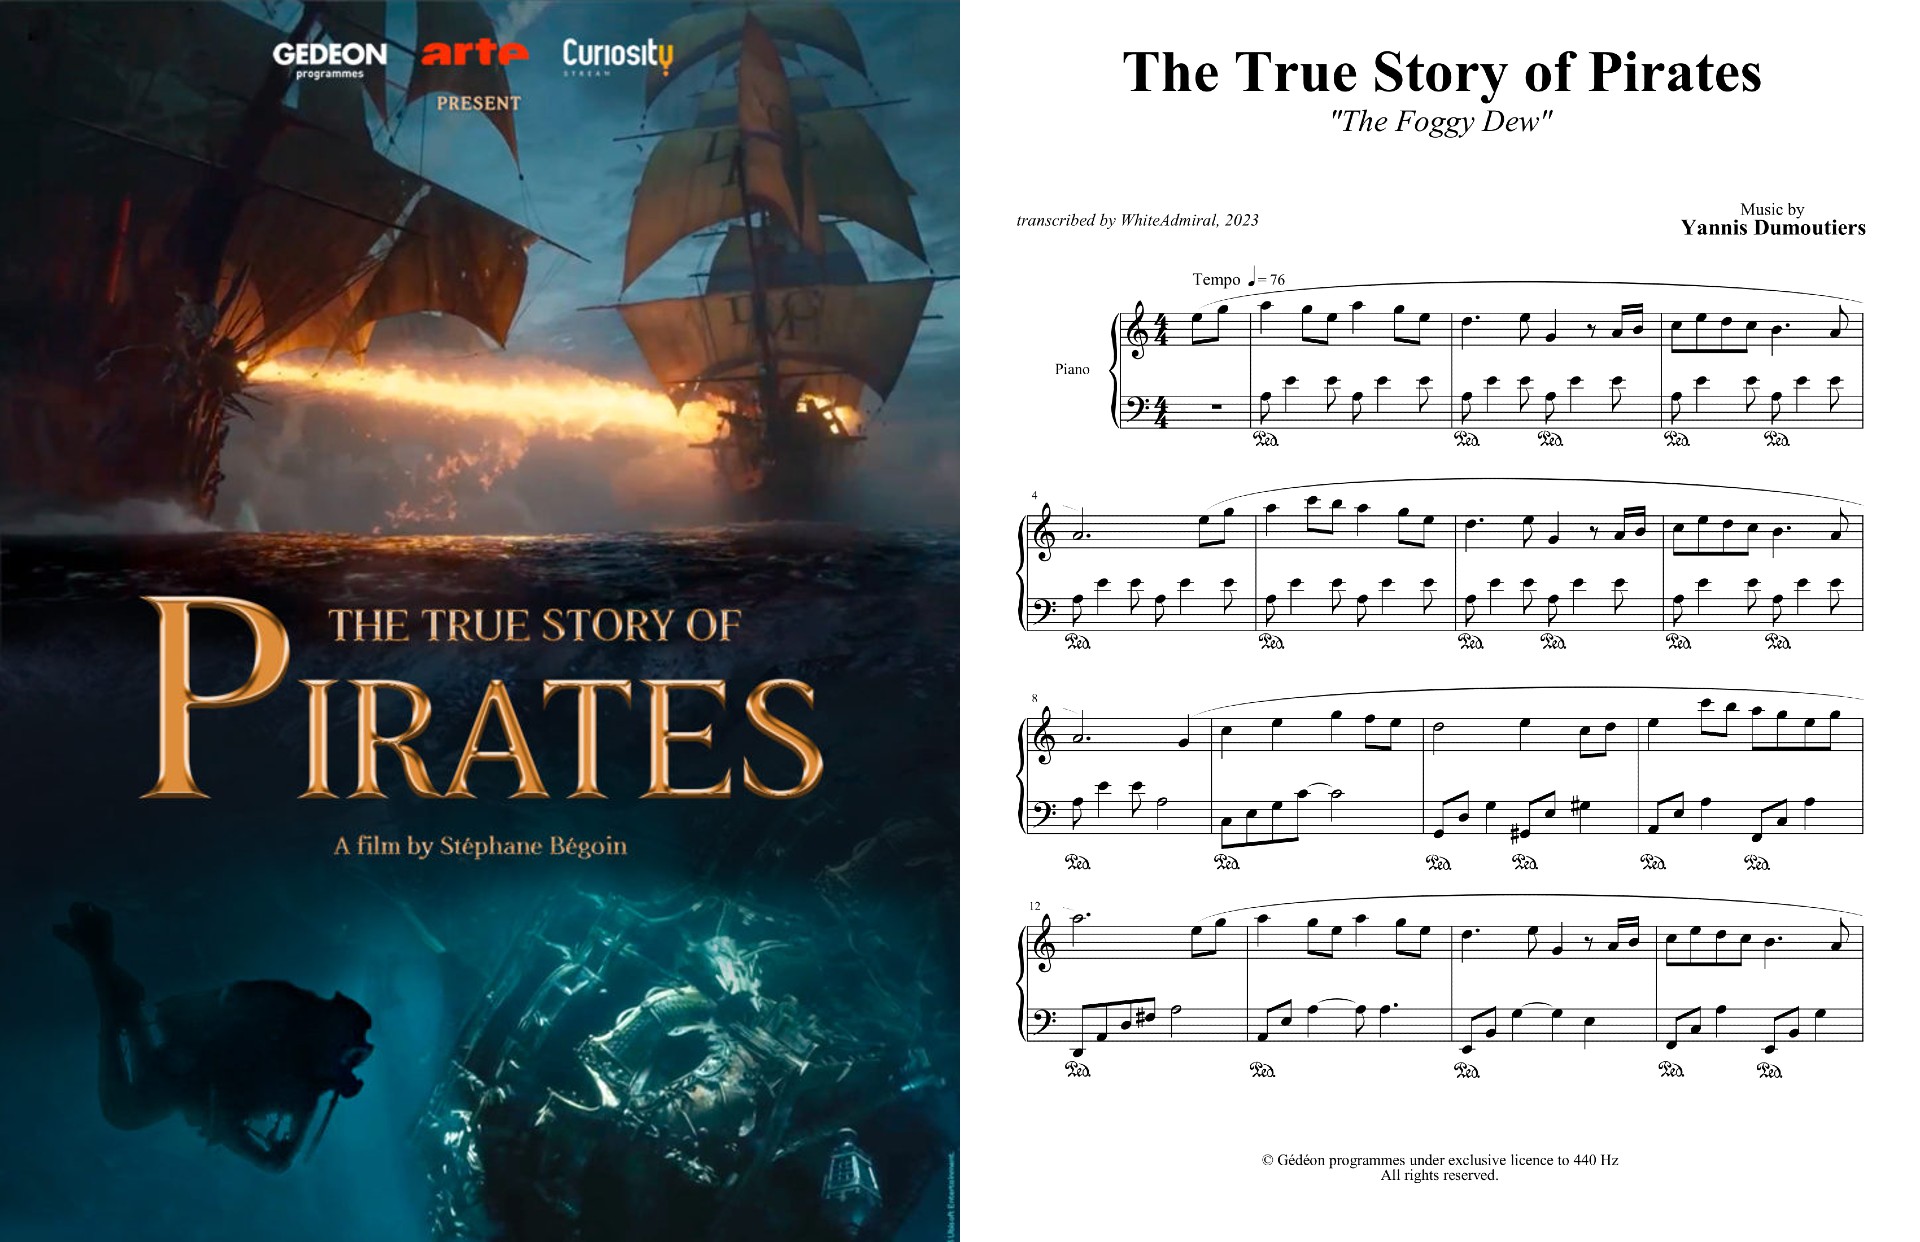 The True Story of Pirates - The Foggy Dew.jpg